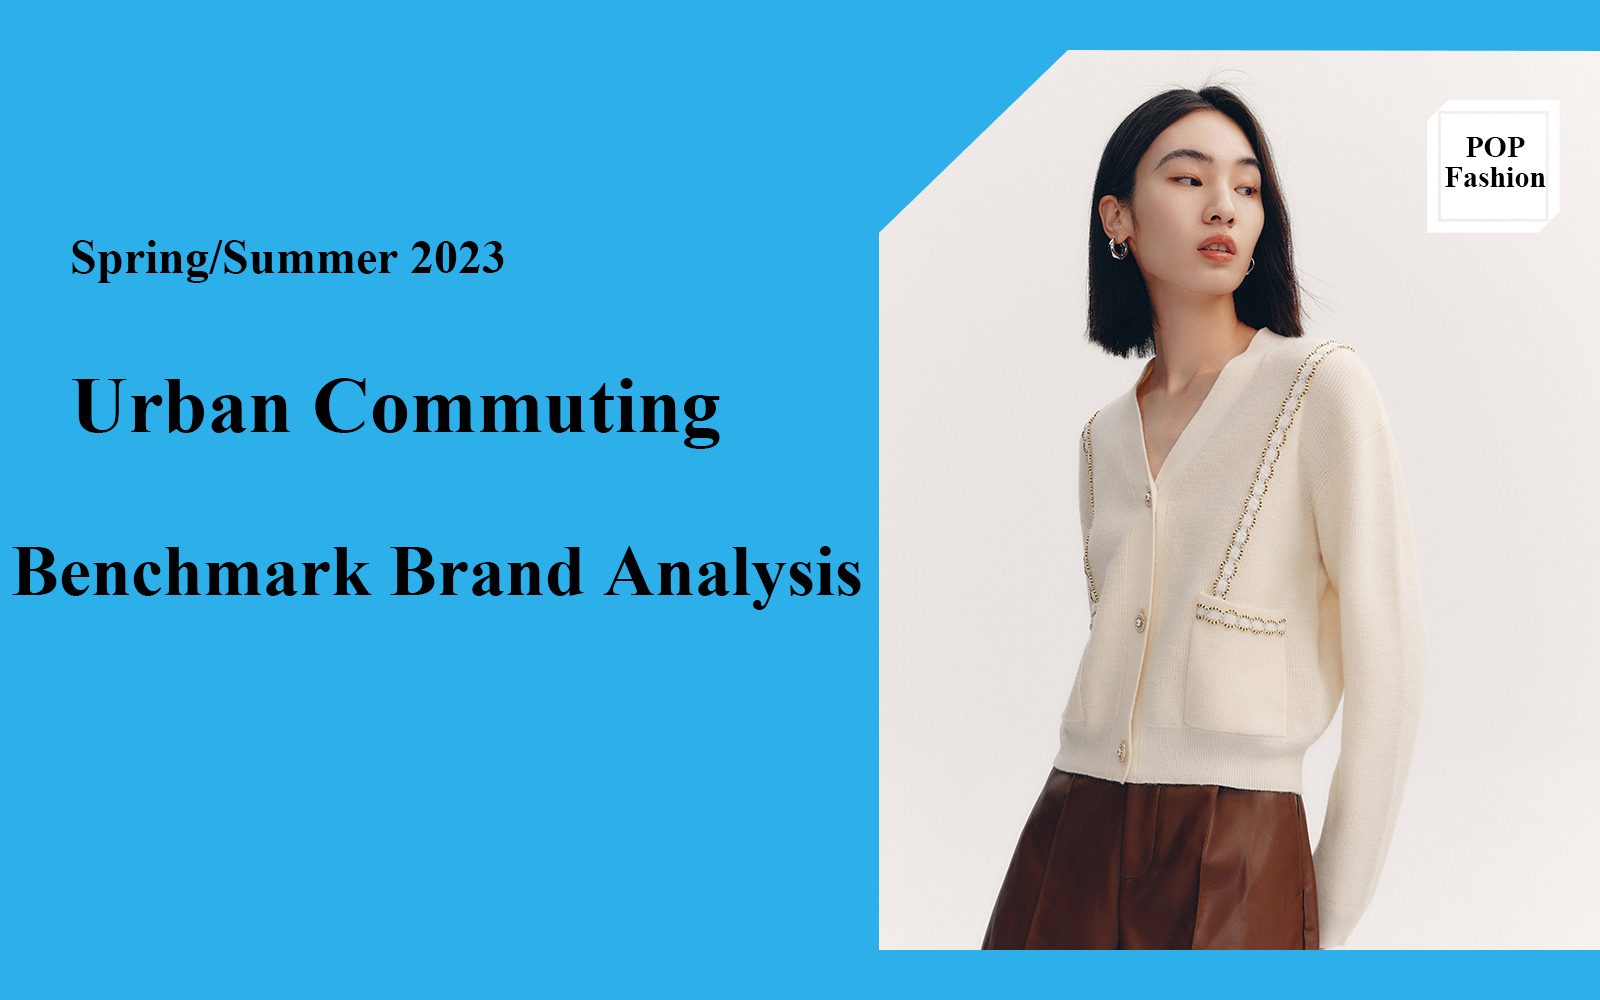 Urban Commuting -- The Comprehensive Analysis of Women's Knitwear Benchmark Brand